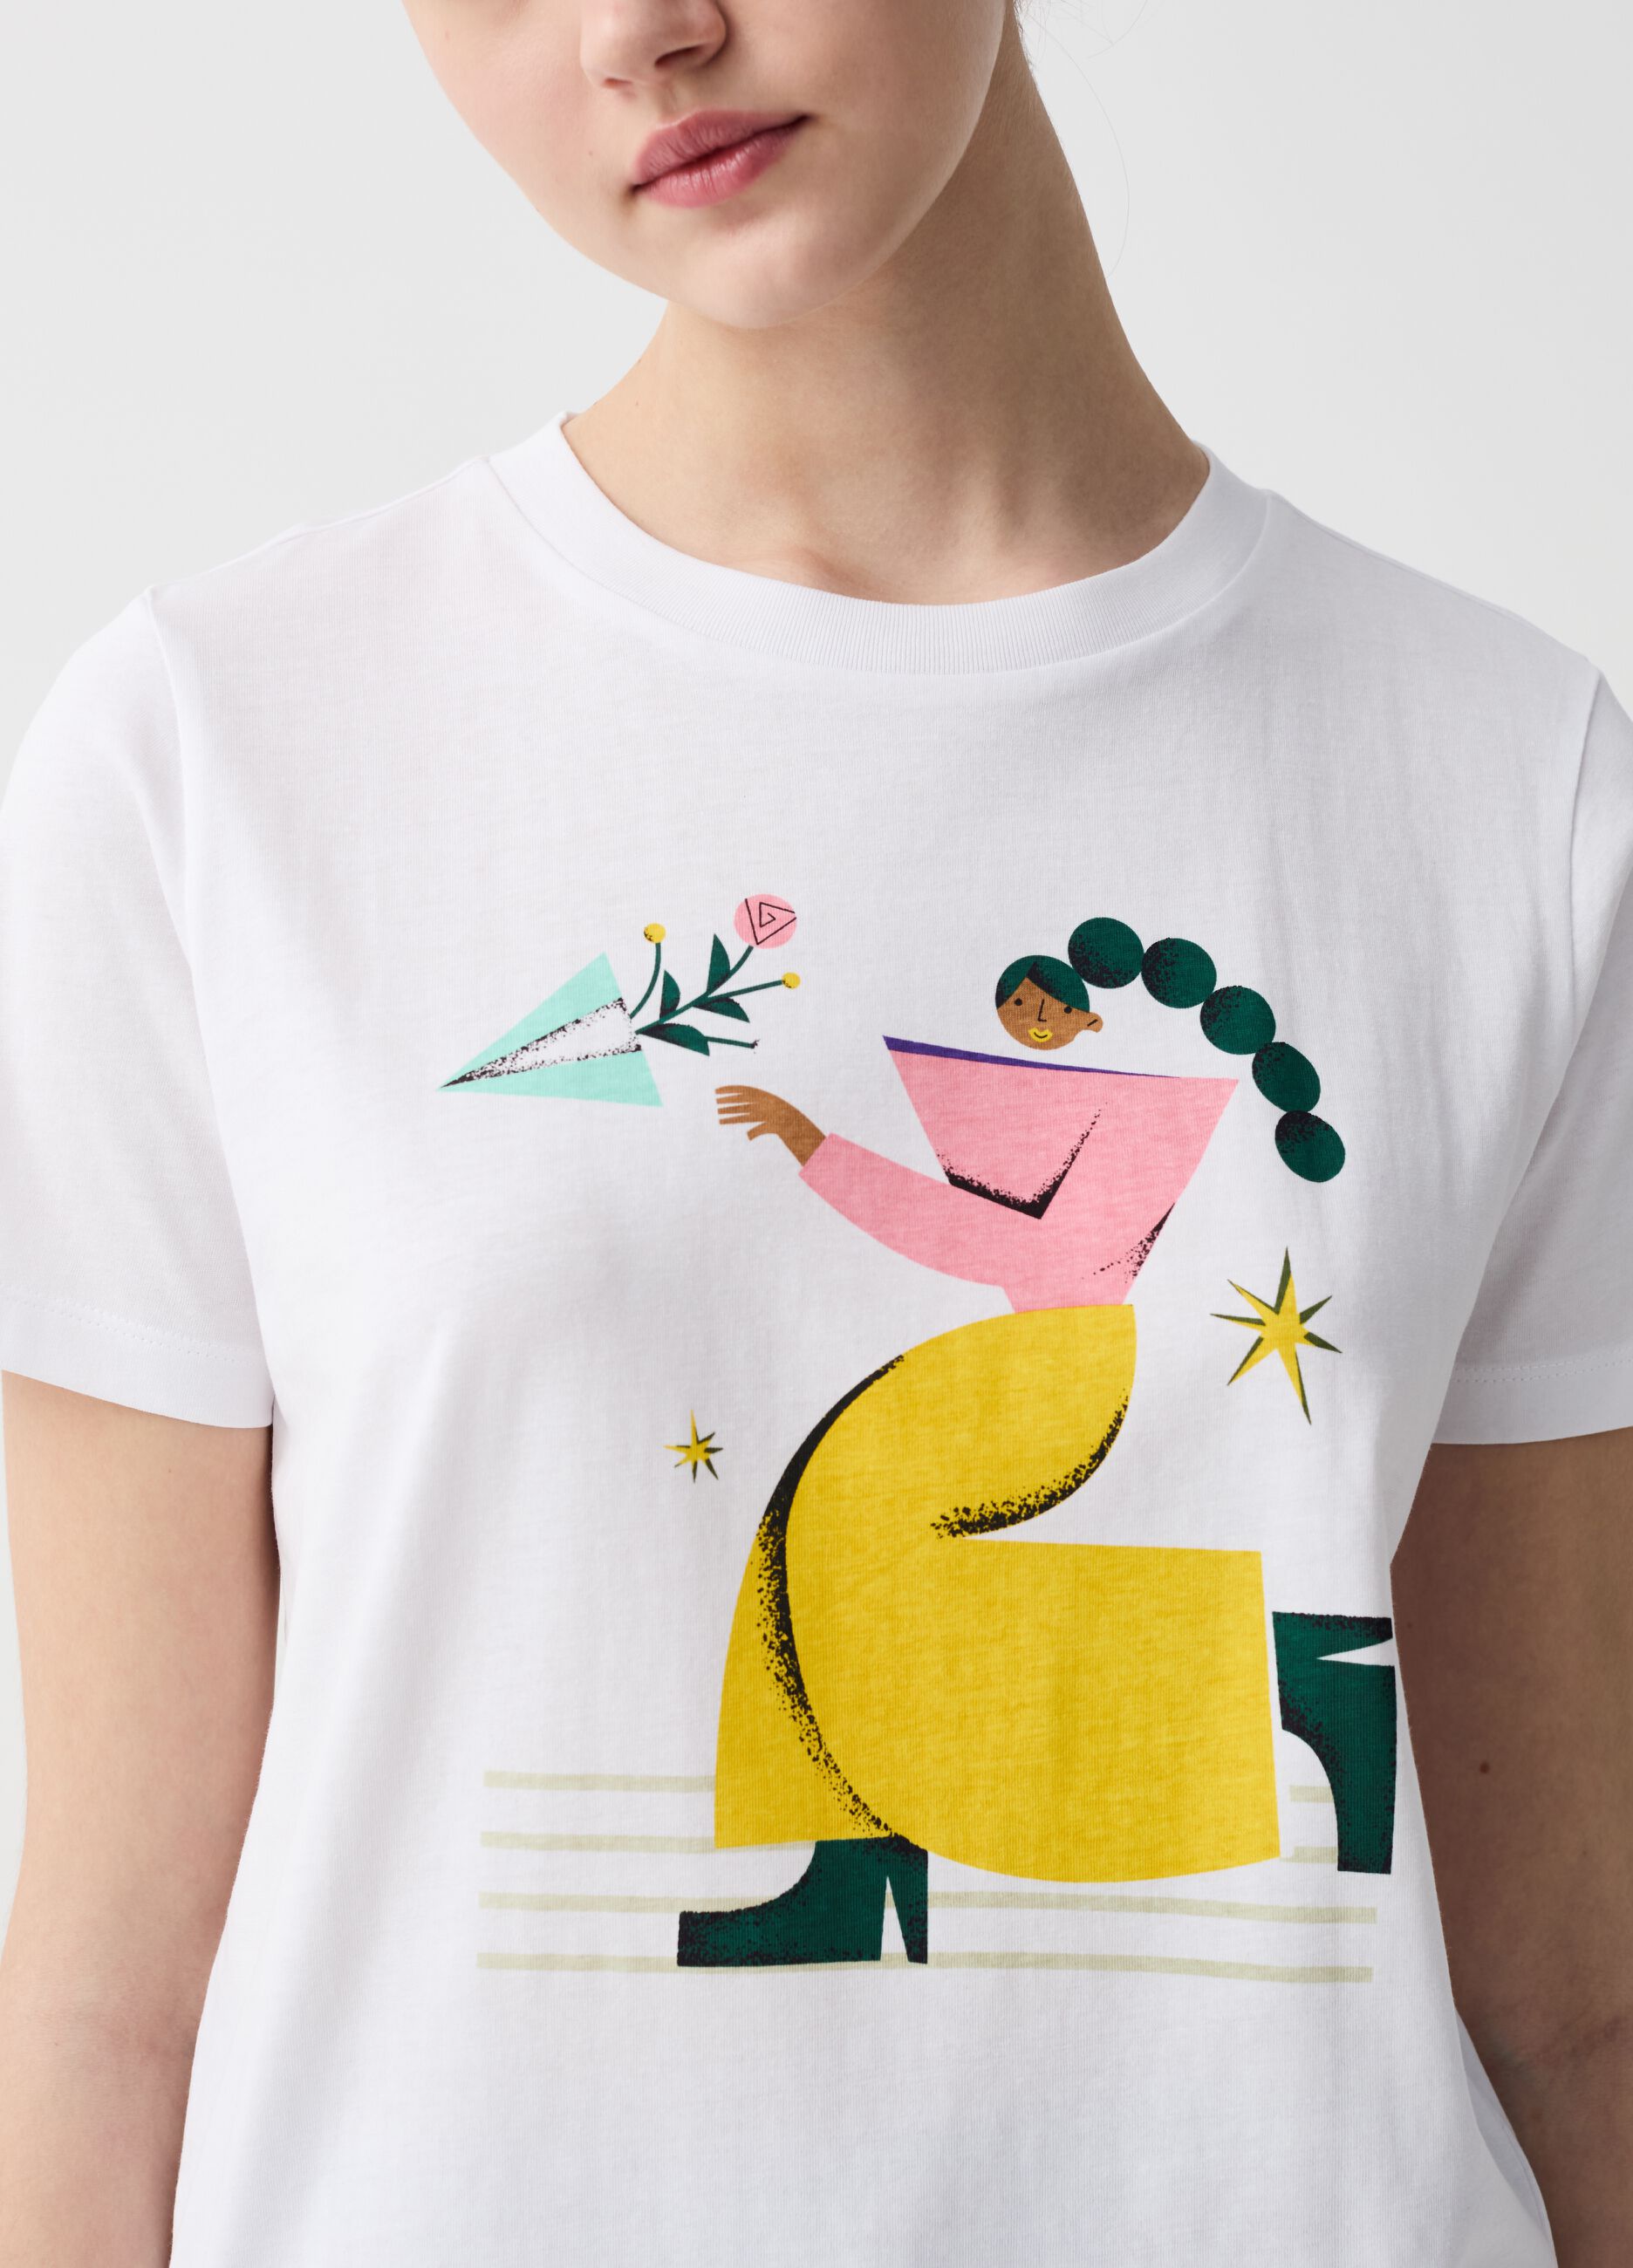 T-shirt with graphic illustration by Magda Azab